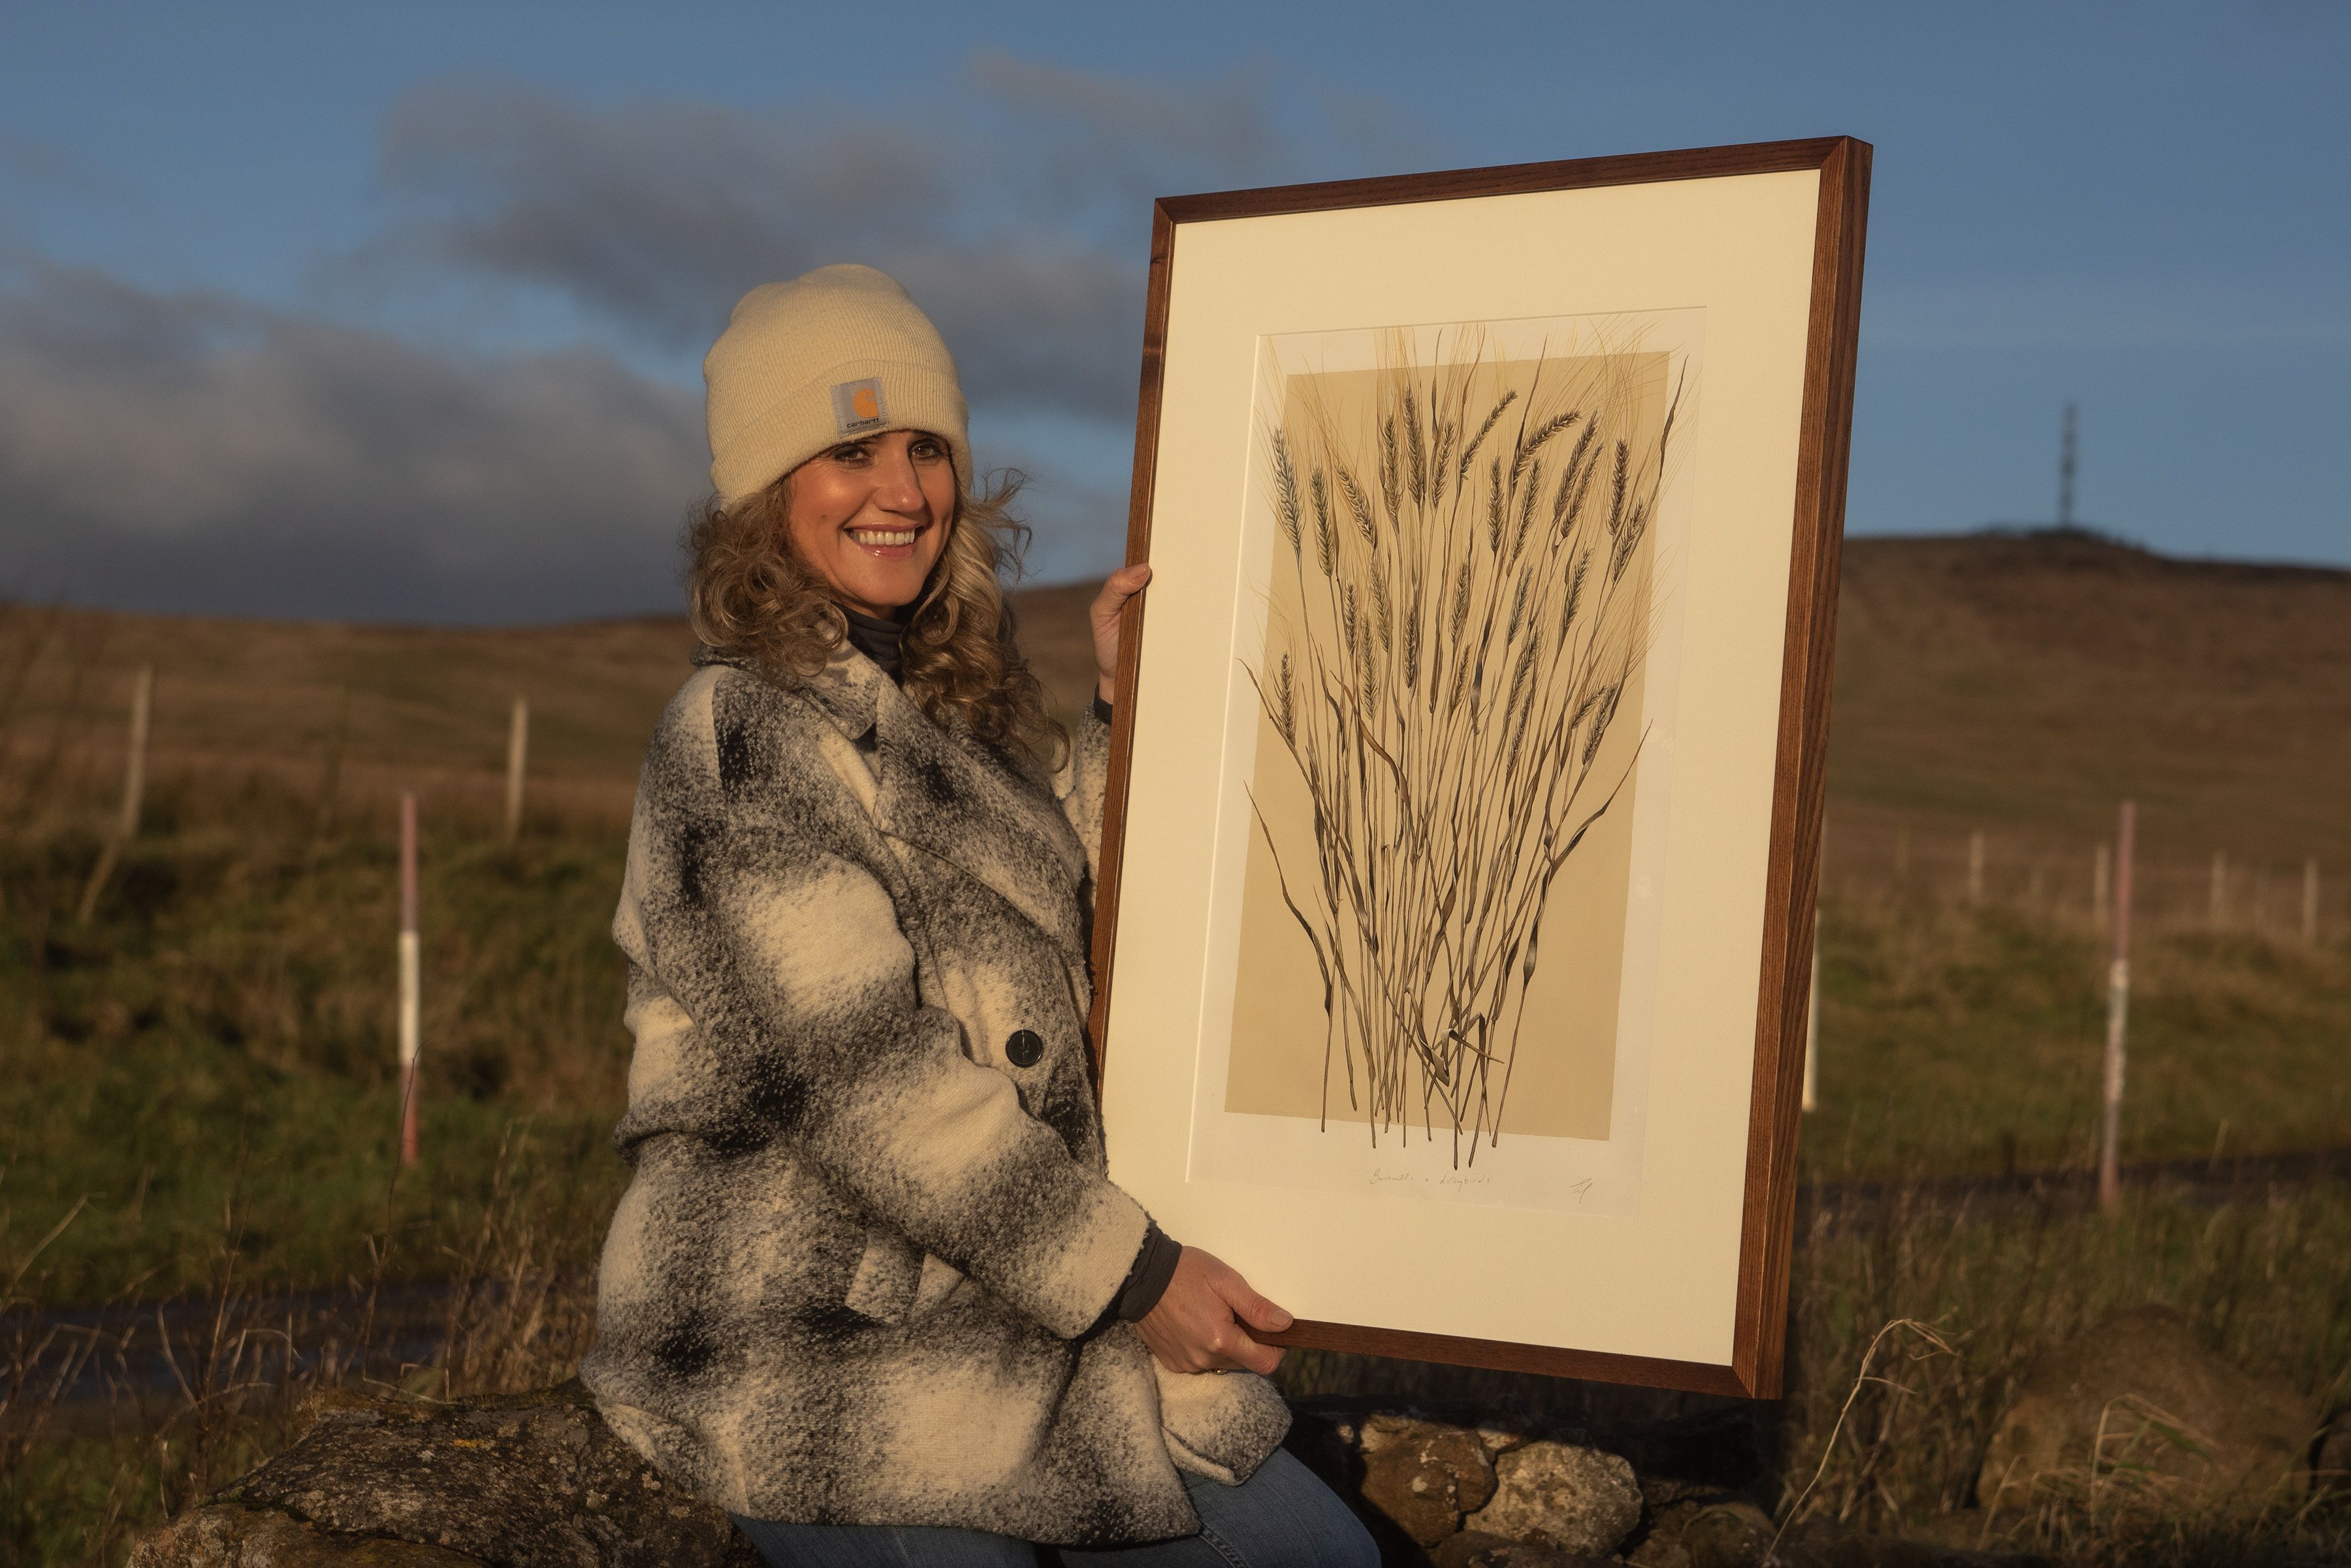 ART: Artist Eimear Maguire up on the Belfast Hills with the print she created for Bushmills Whiskey